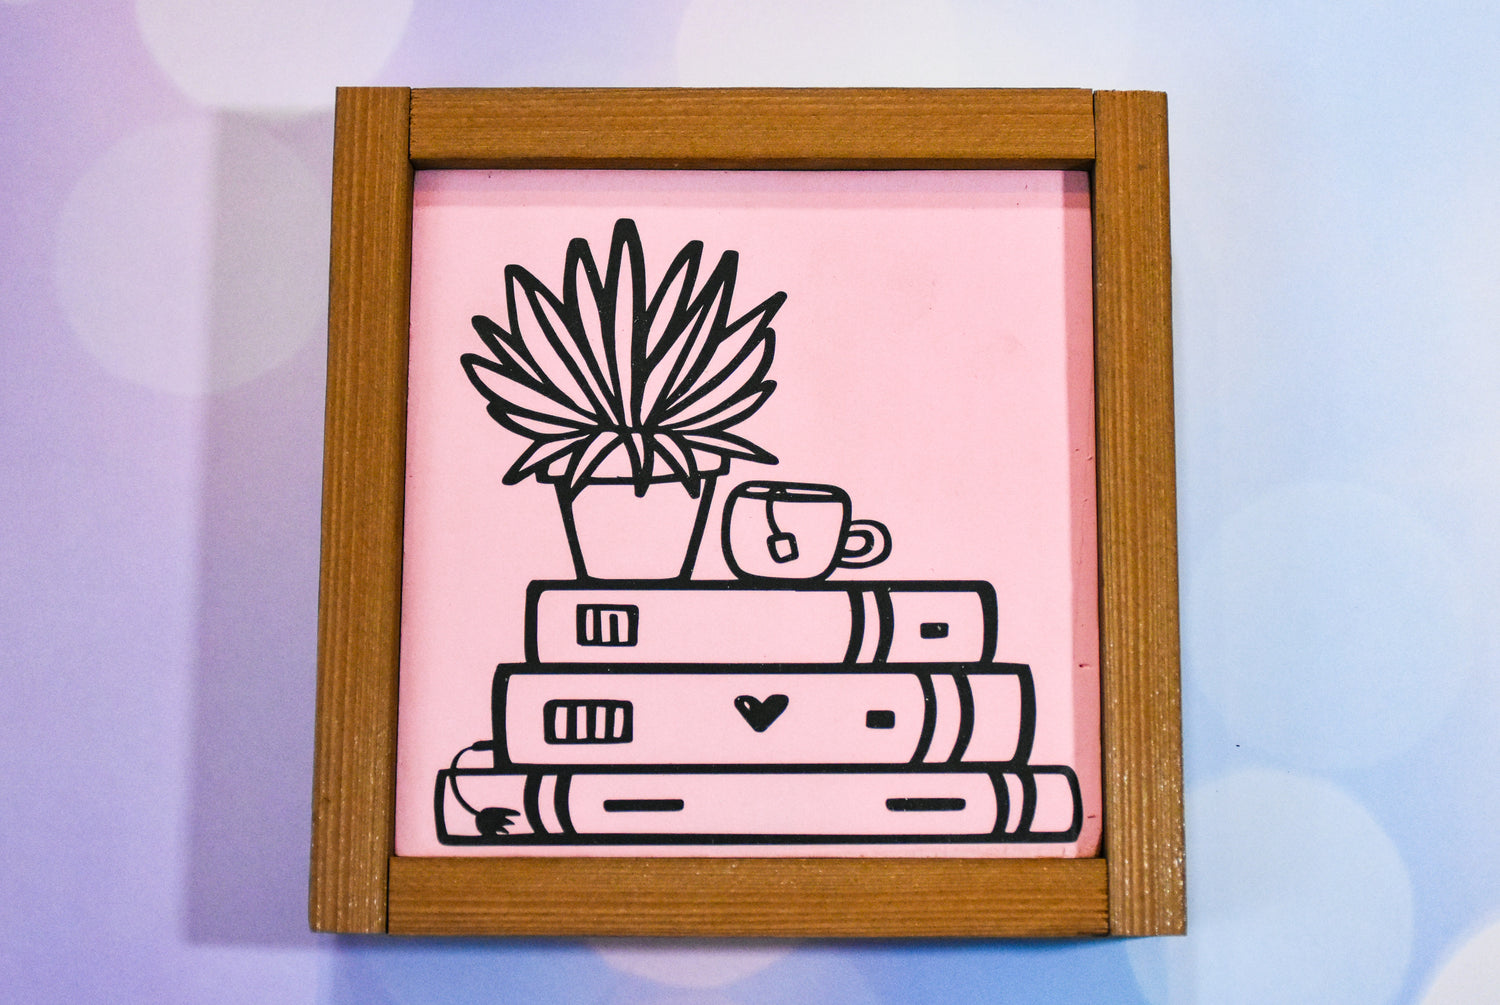 A framed wood square, painted pink, with black vinyl stack of books, a plant, and a cup of tea.